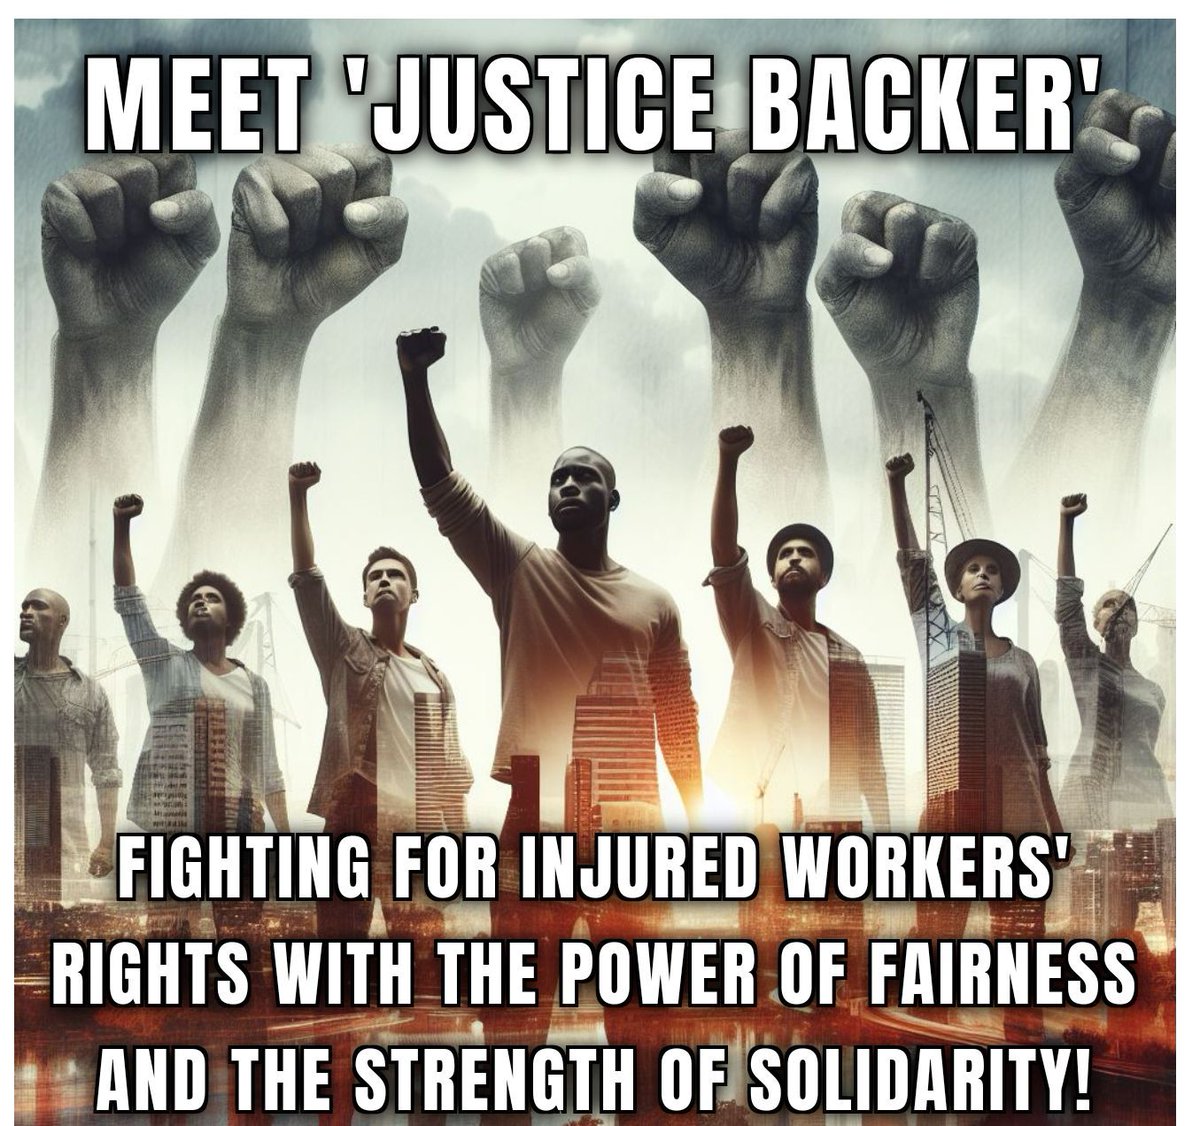 Meet 'Justice Backers, The Warriors' fighting for injured workers' rights with the power of fairness and the strength of solidarity! Together, we can make a difference.  #InjuredWorkers #FairTreatment